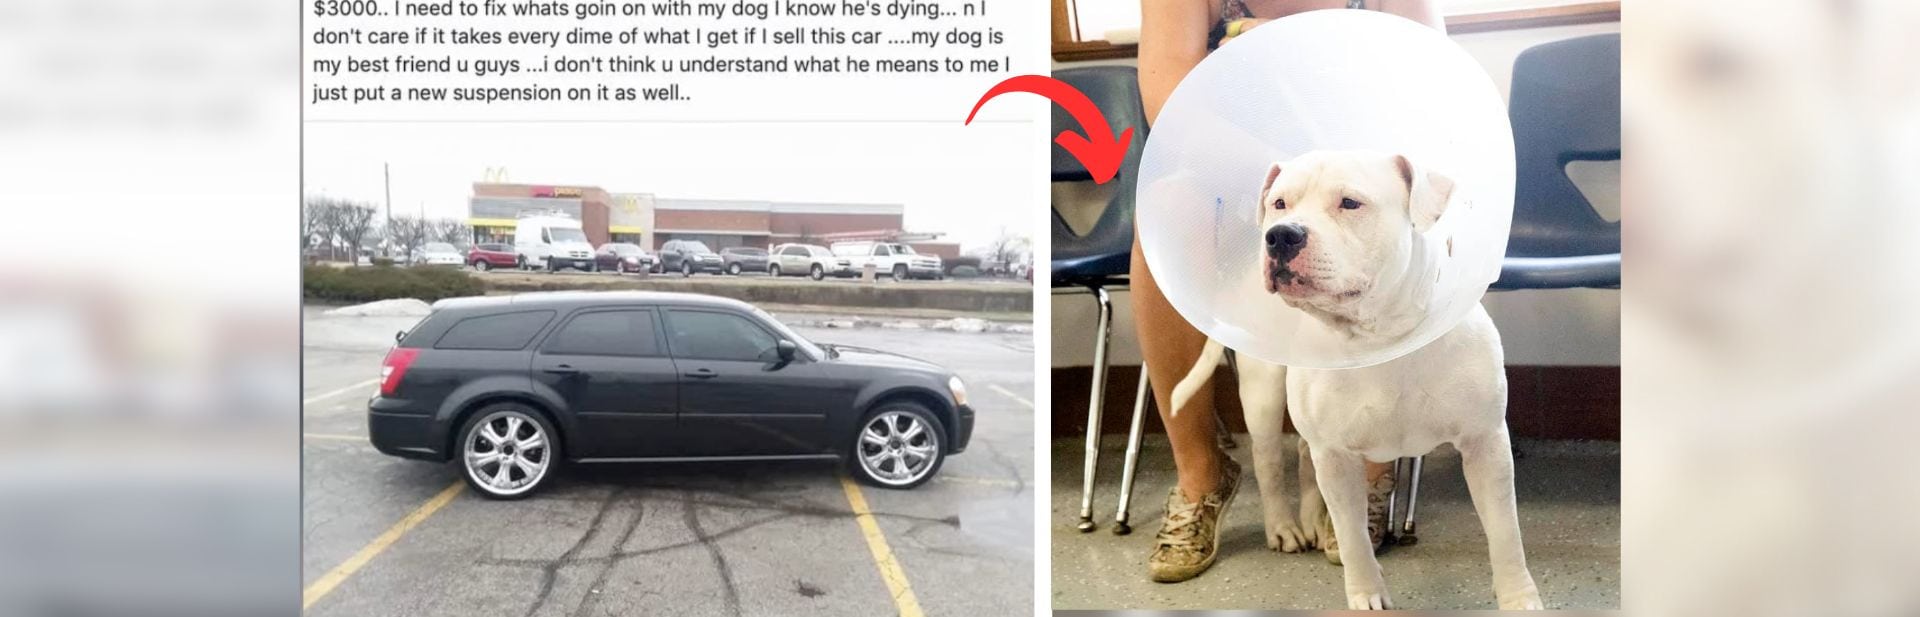 Indianapolis Singer Puts Car on Sale to Save His Beloved Dog’s Life